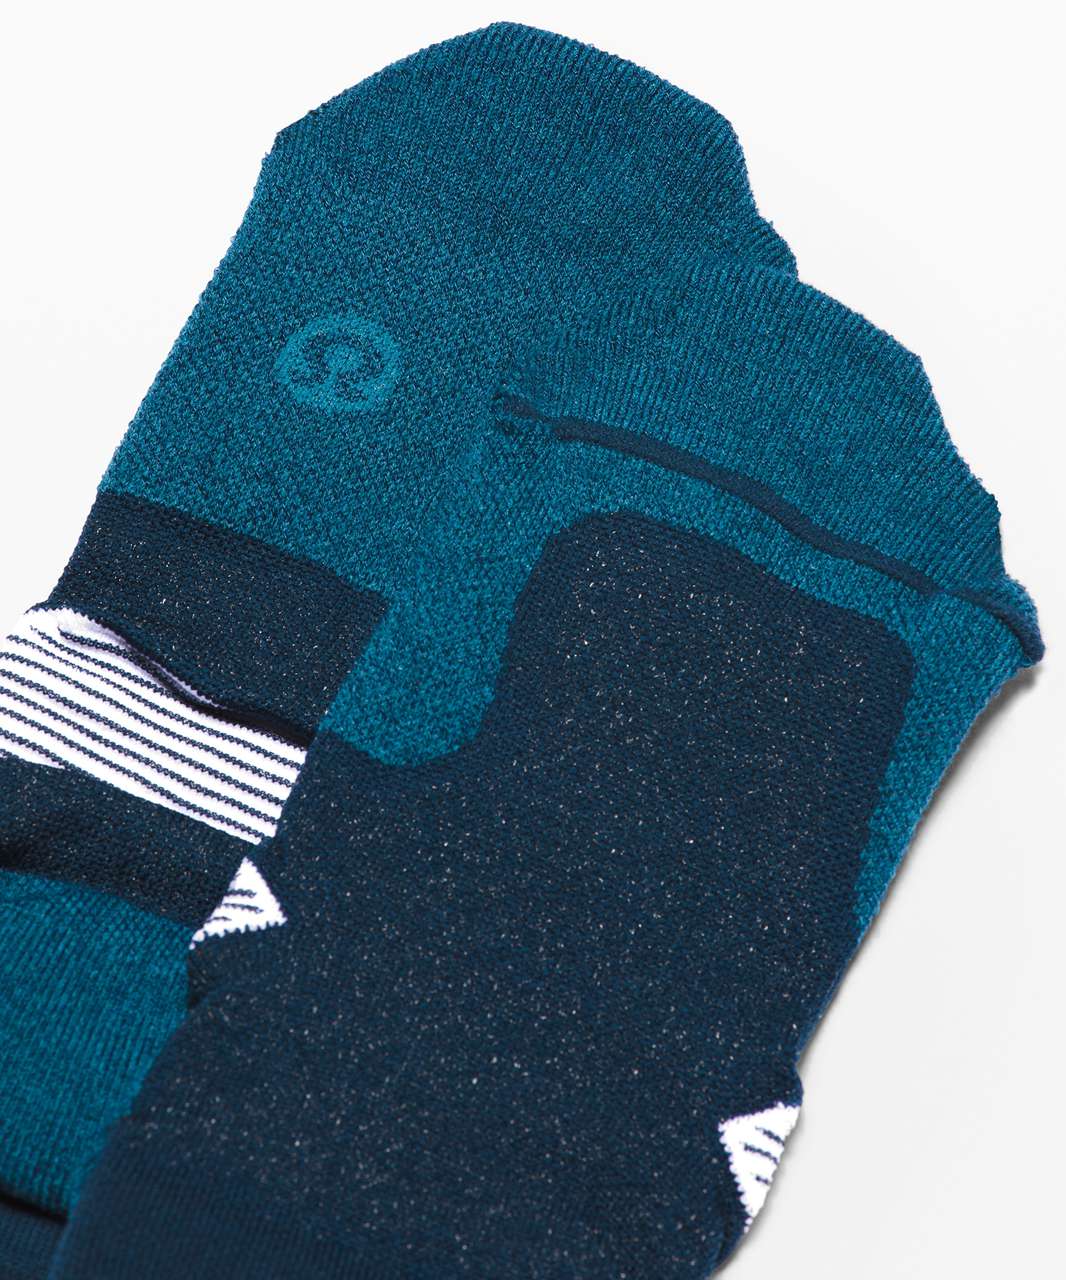 Lululemon Speed Sock *Silver - Night Diver / Pacific Teal